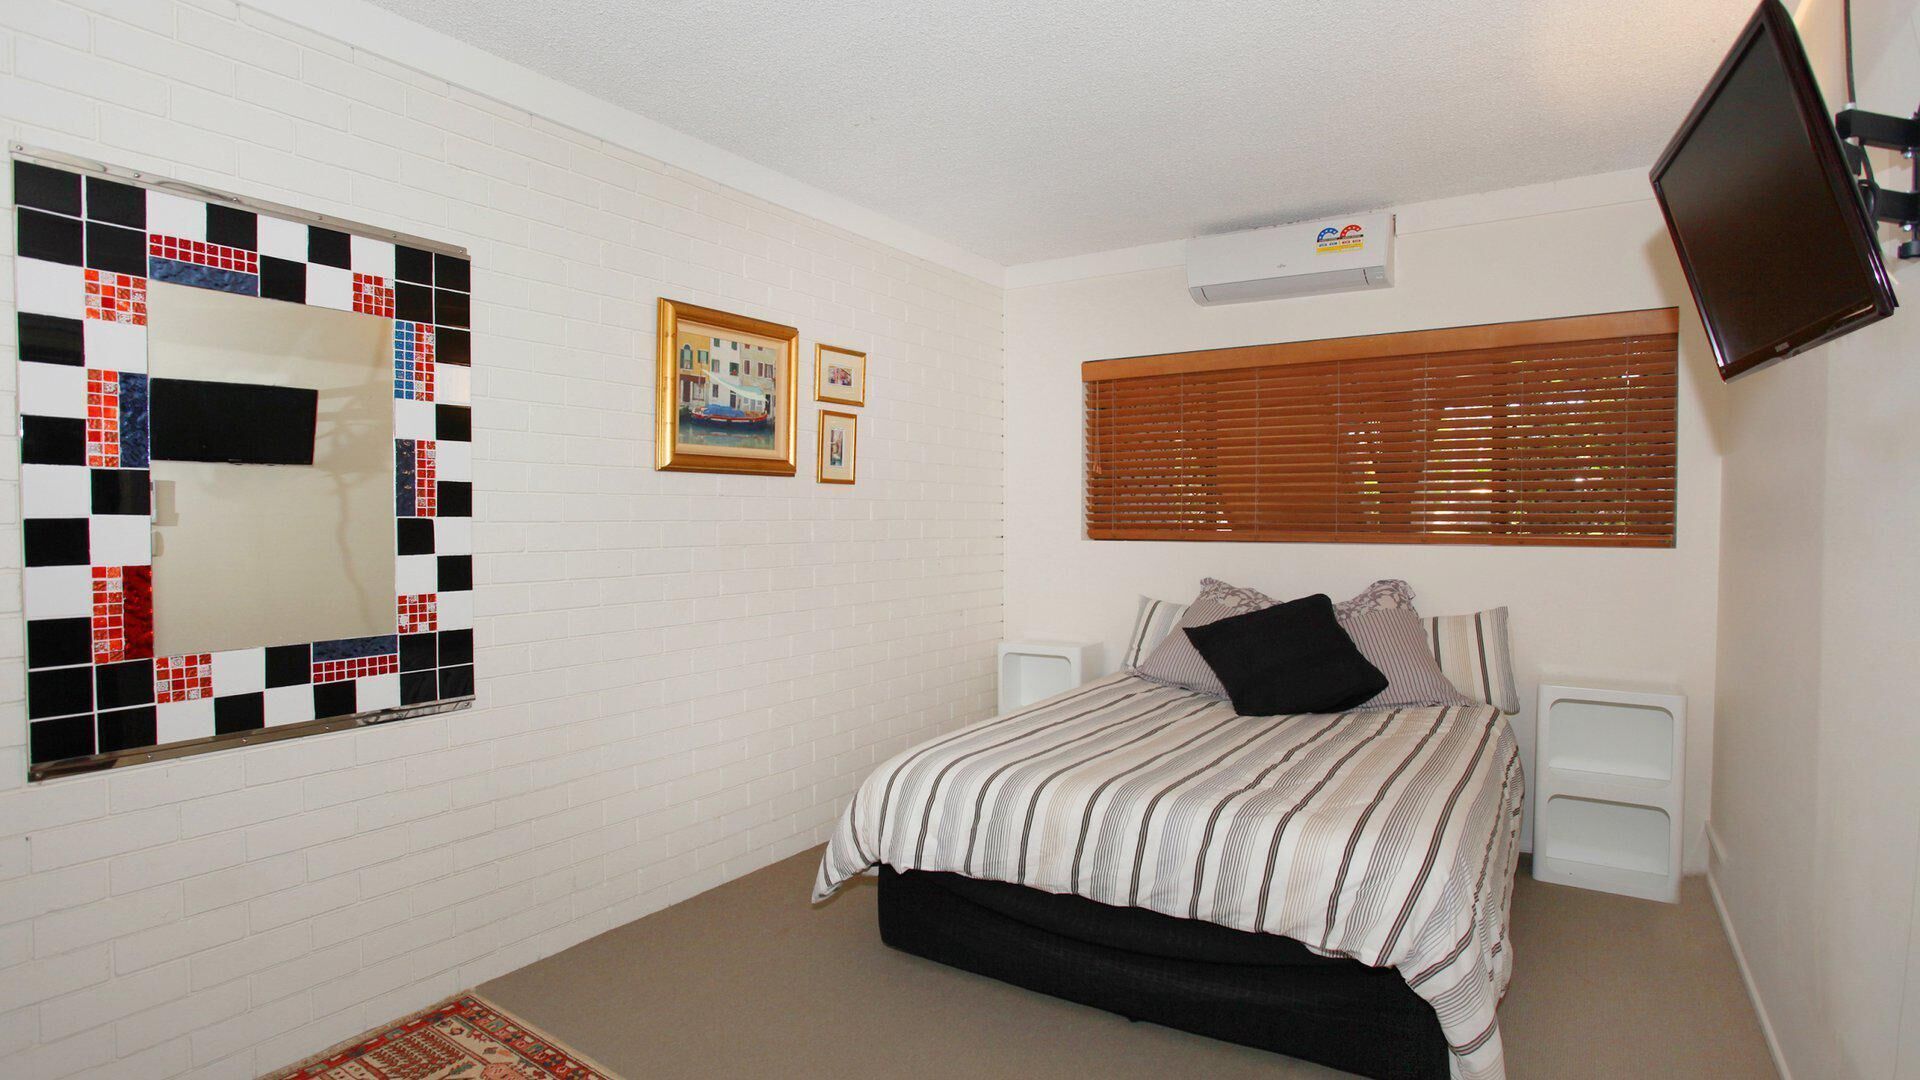 Anjuna 2 - Canal Front 2 Bedroom Apartment - Short Walk to Mooloolaba Beach and Cafes!